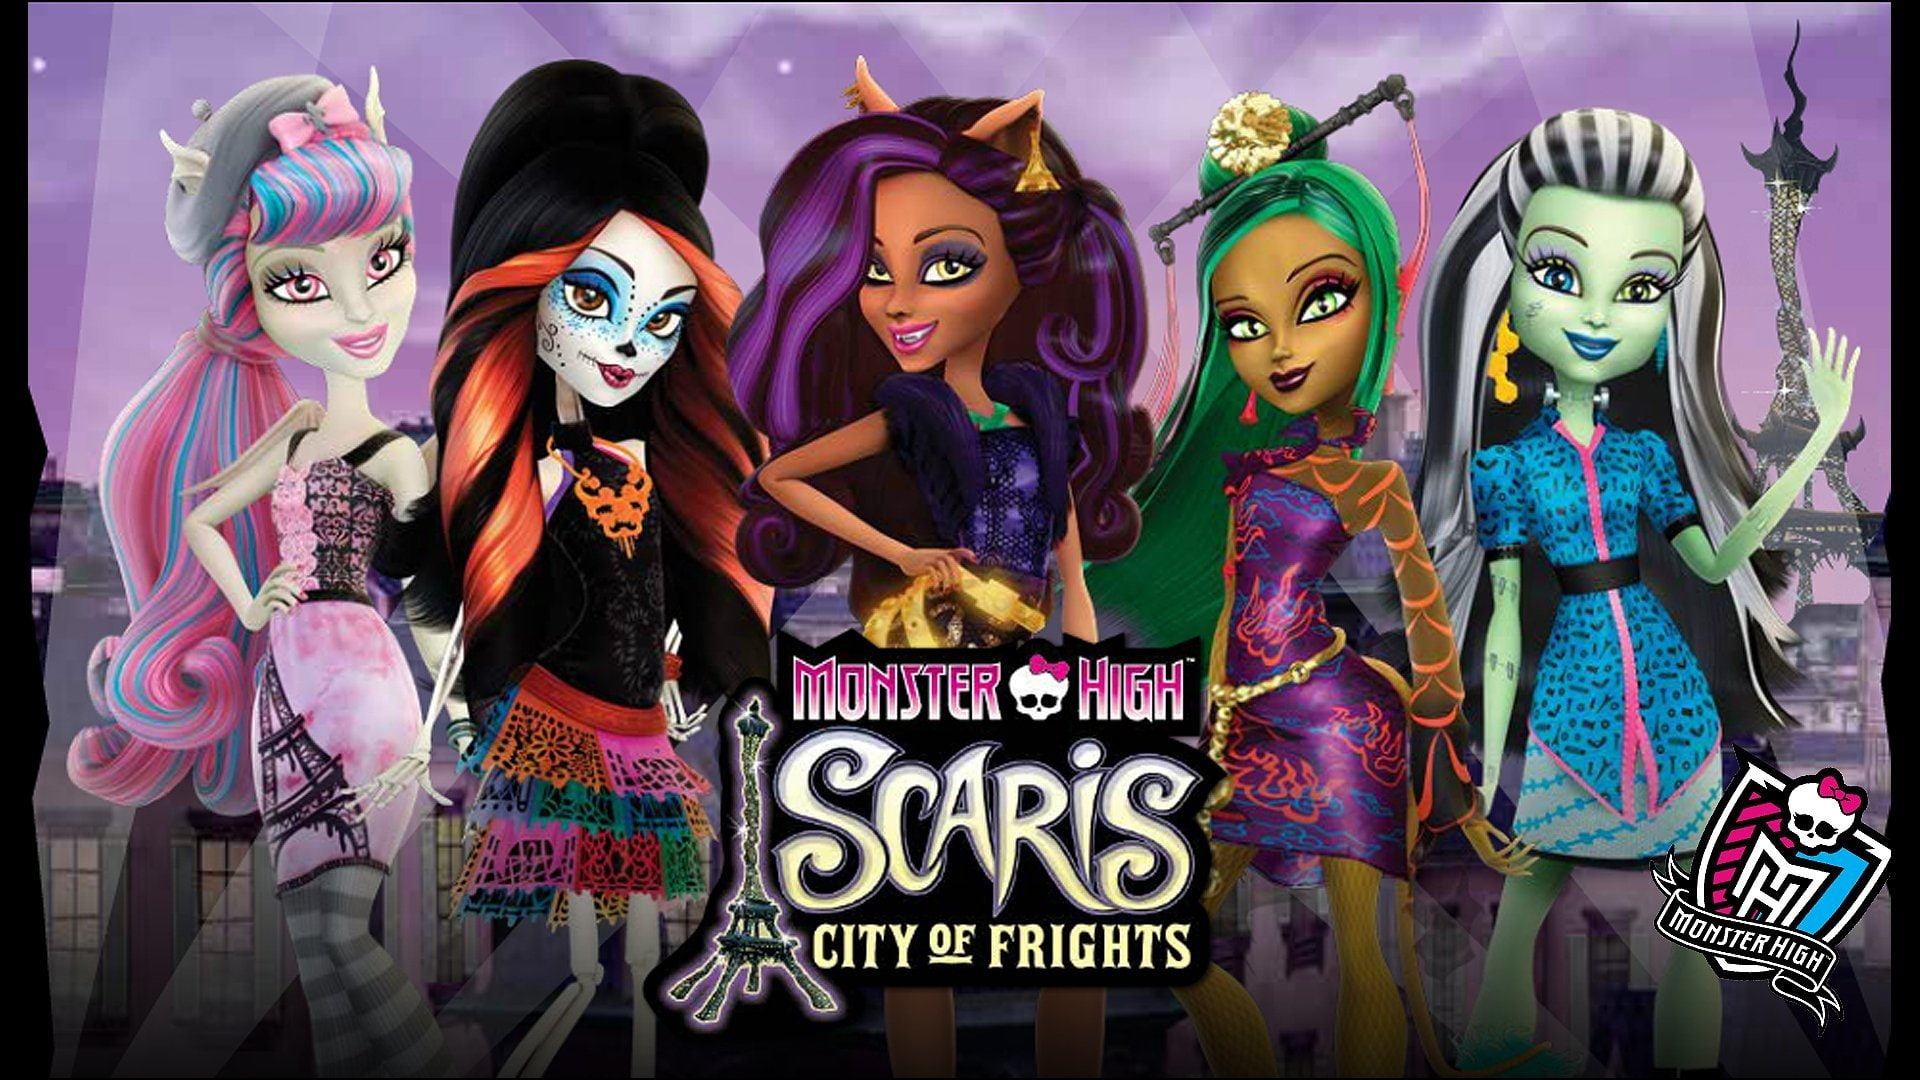 Movie, Monster High: Scaris City of Frights, human representation